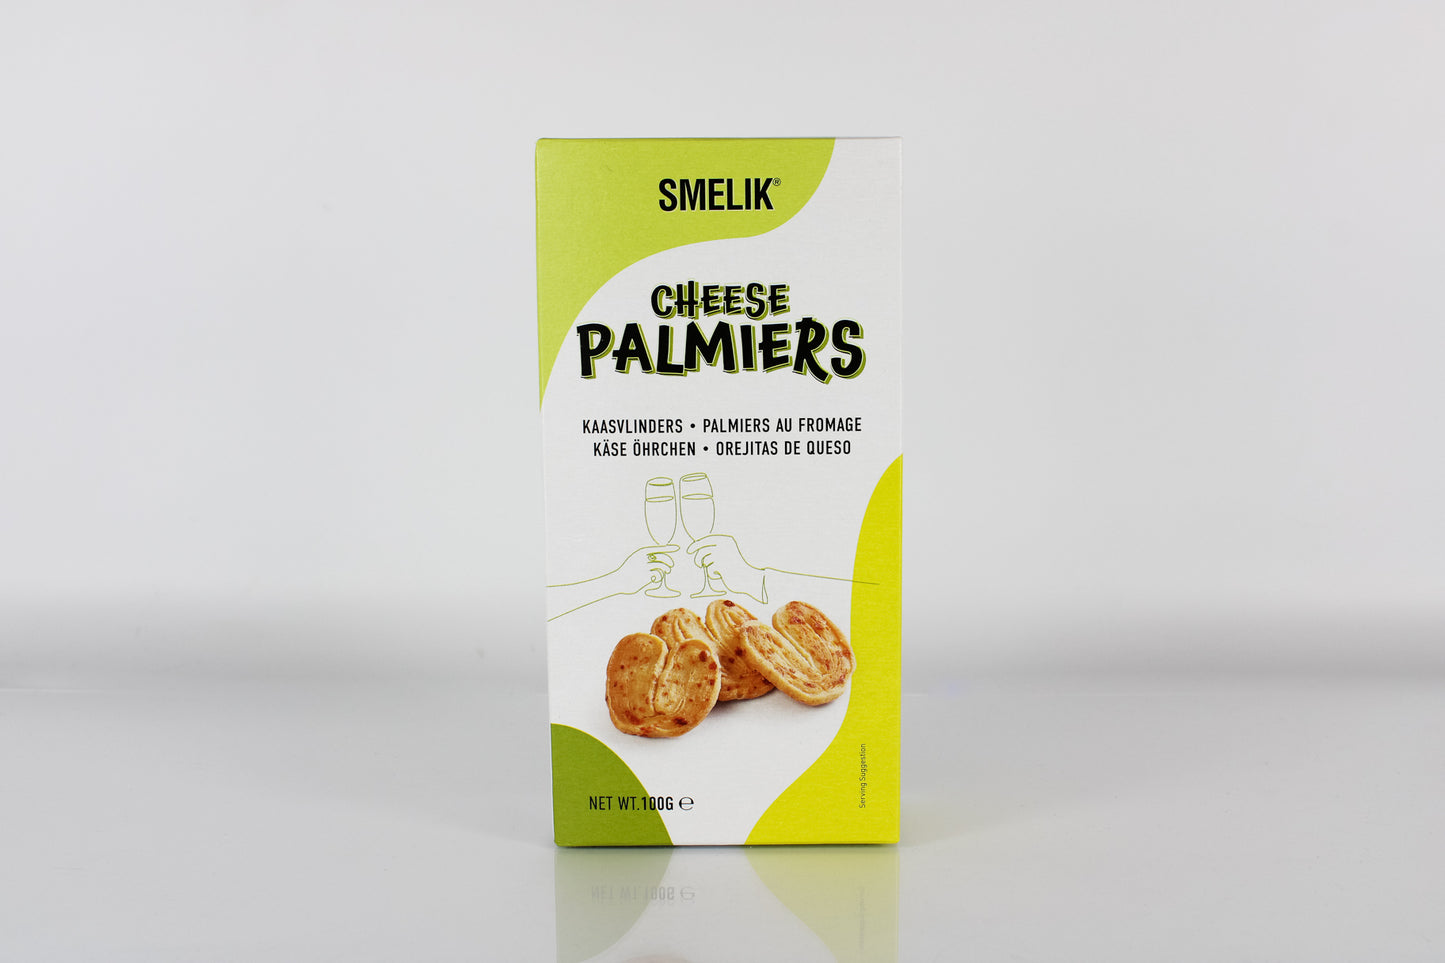 Smelik Cheese Palmiers